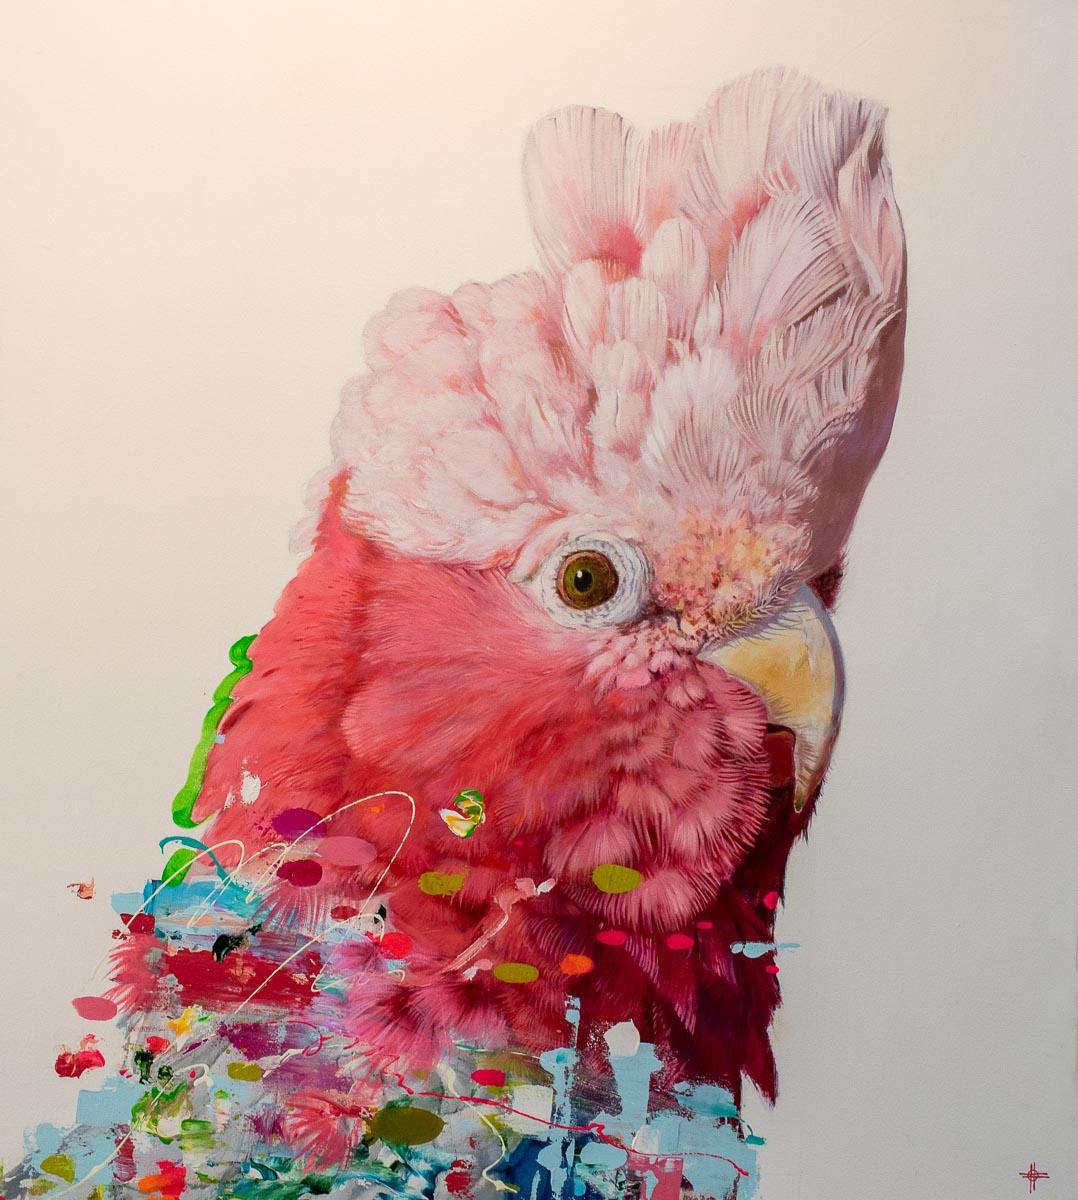 Keng Wai Lee’s gorgeously rich animal impressions are a synergy of decorative tableaux and depiction in paint on canvas of his memories and imagination.

“Using acrylic as a medium, I tend to reminisce through my past getting inspiration to create